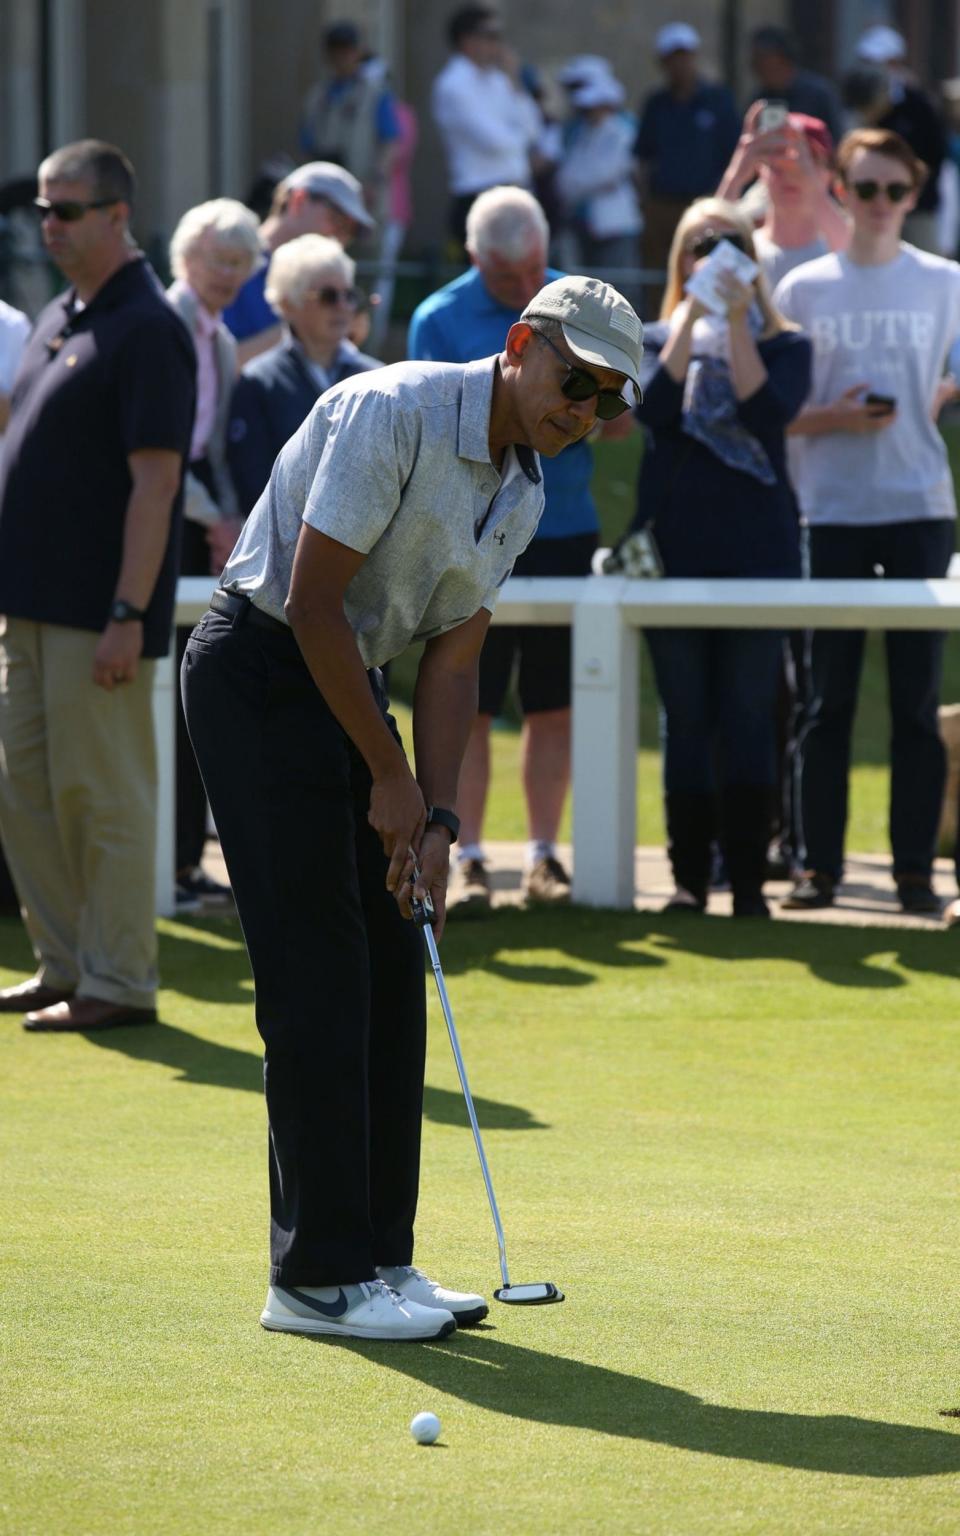 Barack Obama on the putting green  - Credit: Andrew Milligan/PA